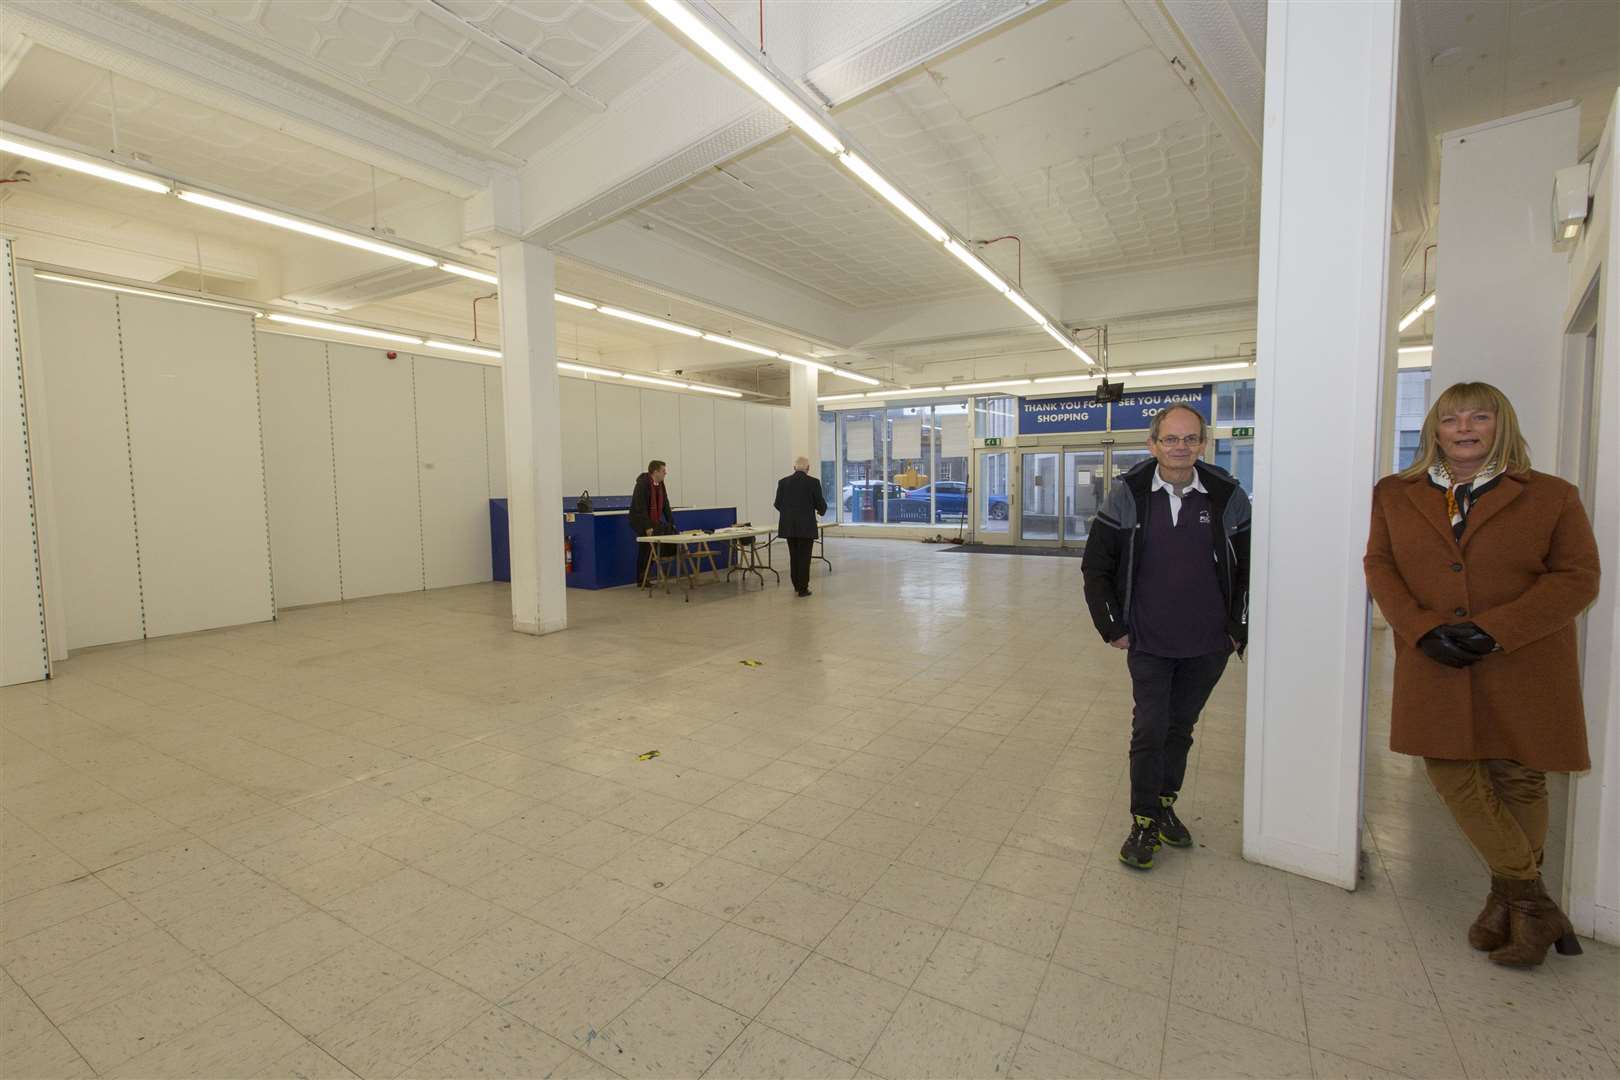 Community council chairwoman Joanna Coghill and secretary John Bogle on the ground floor of the former Original Factory Shop building. Picture: Robert MacDonald / Northern Studios